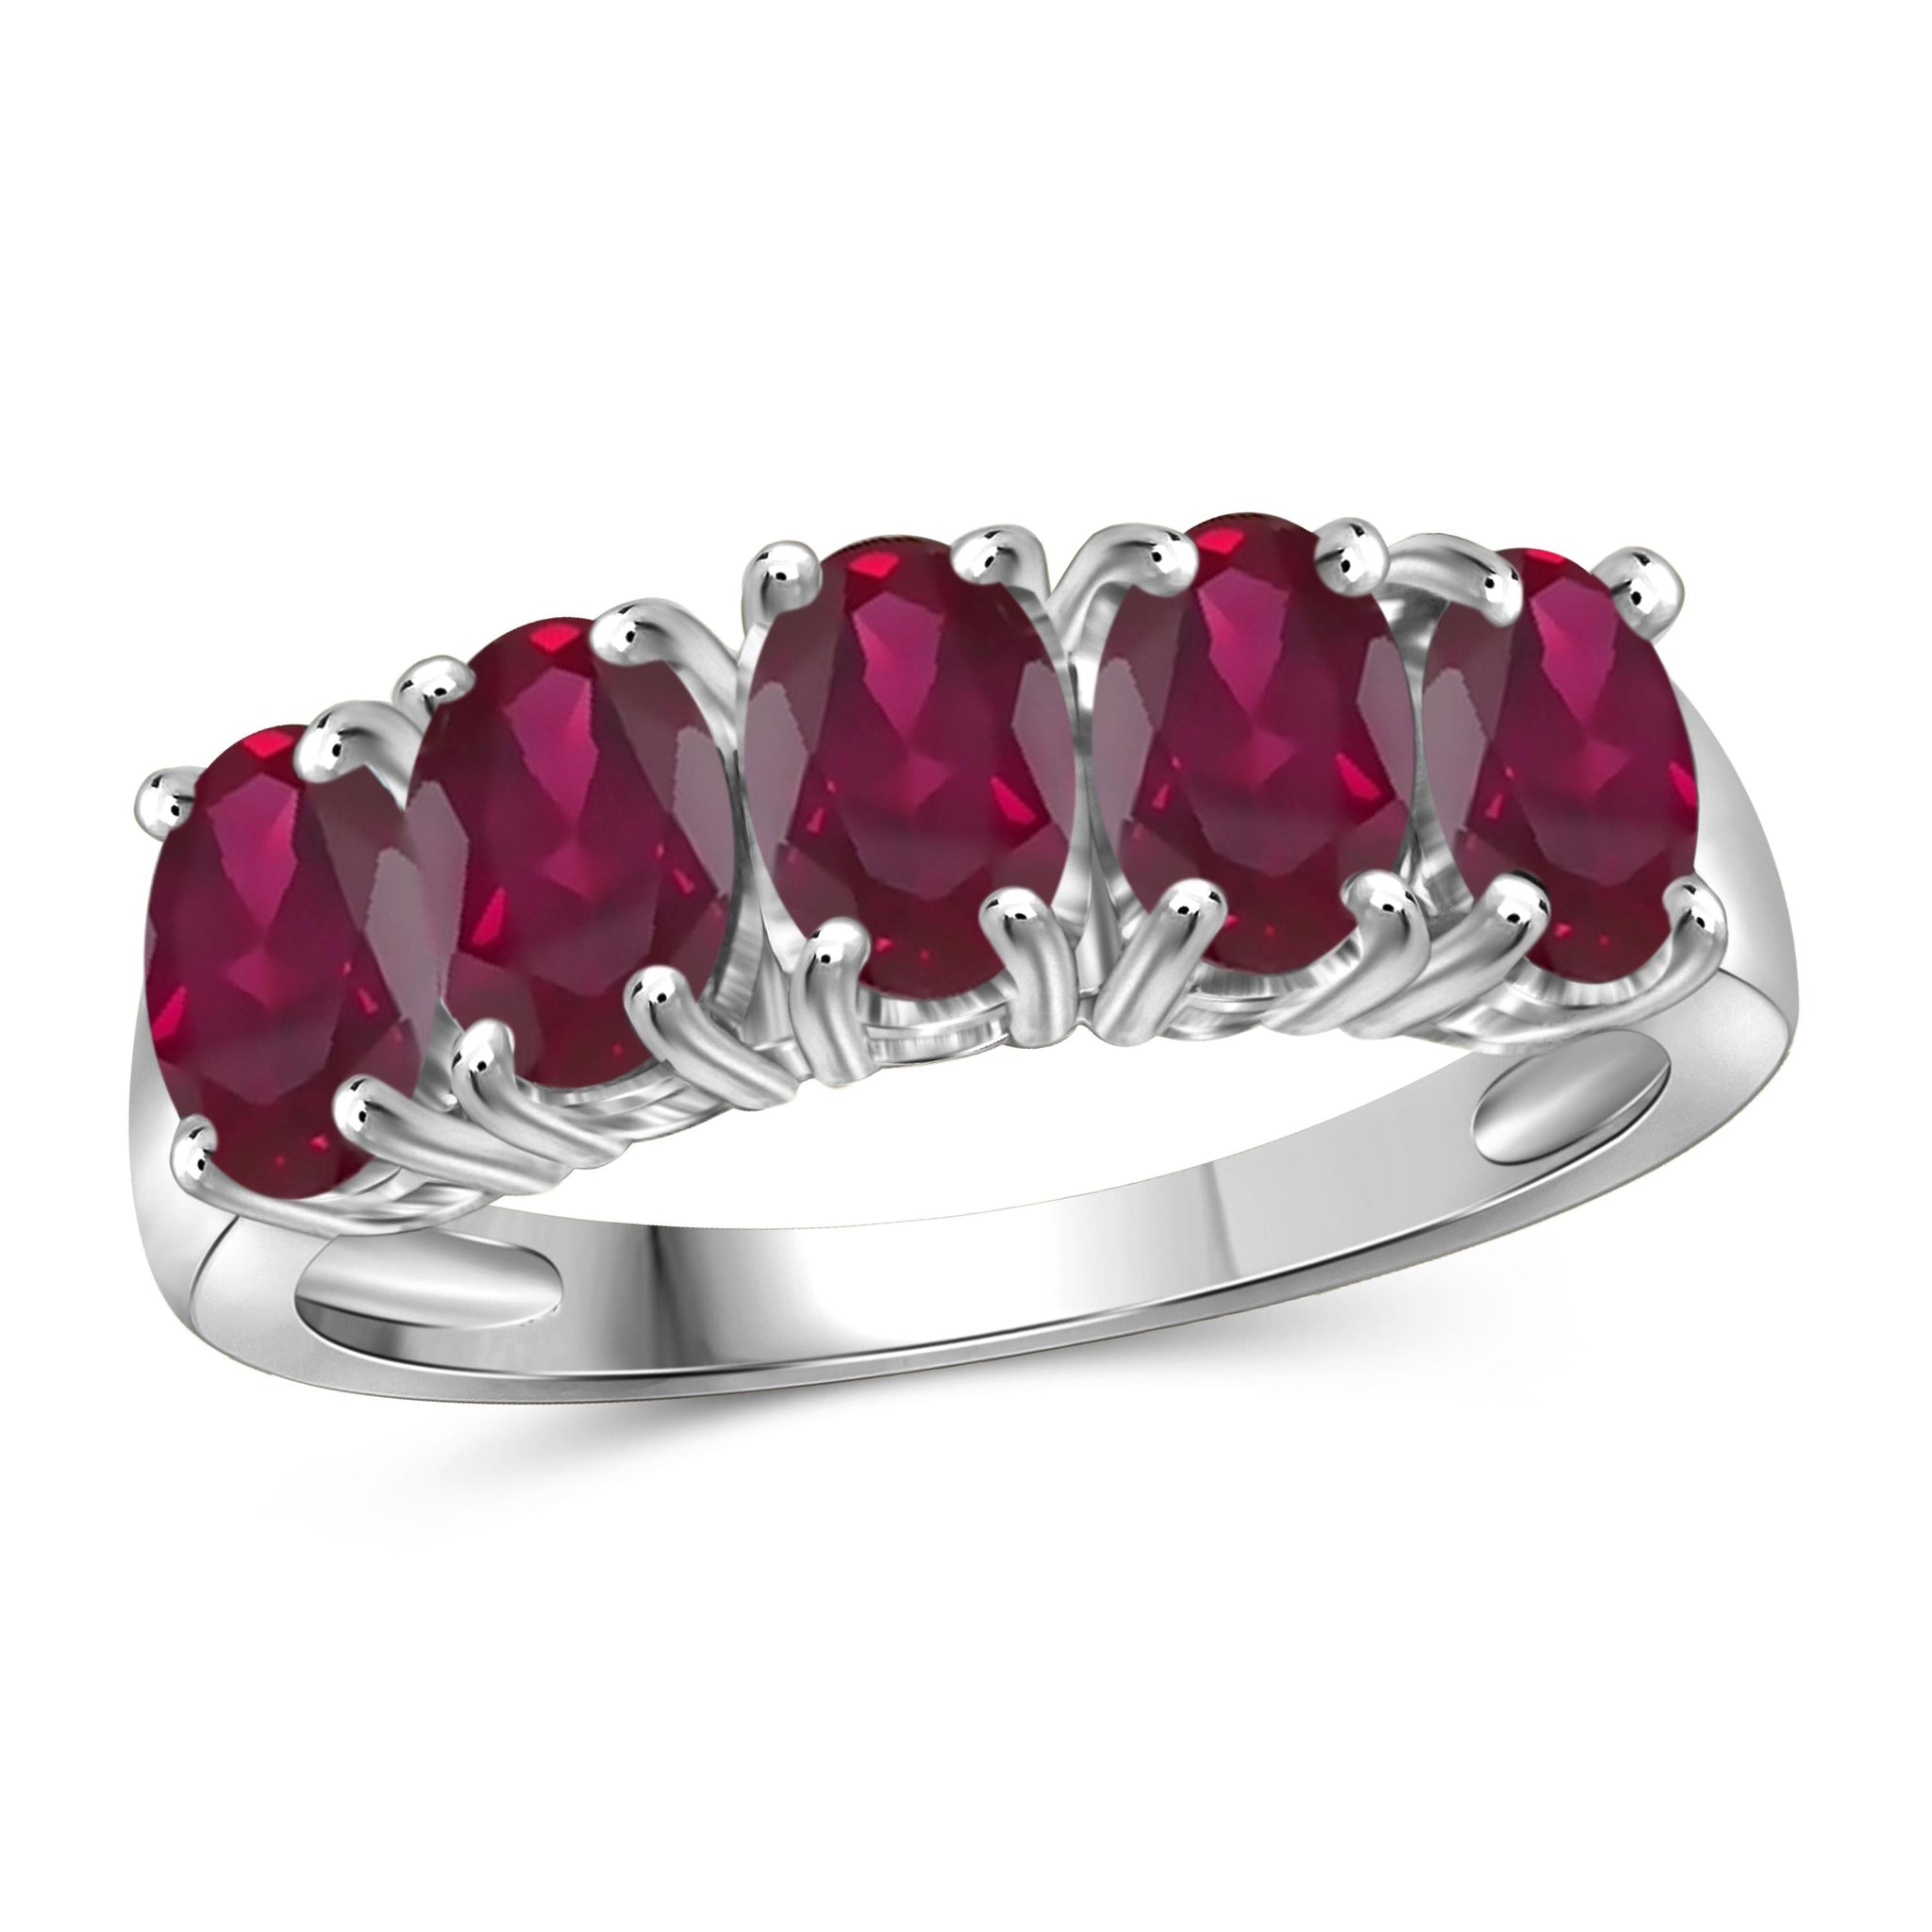 JewelonFire 2.40 Carat T.G.W. Ruby Sterling Silver Ring - Assorted Colors